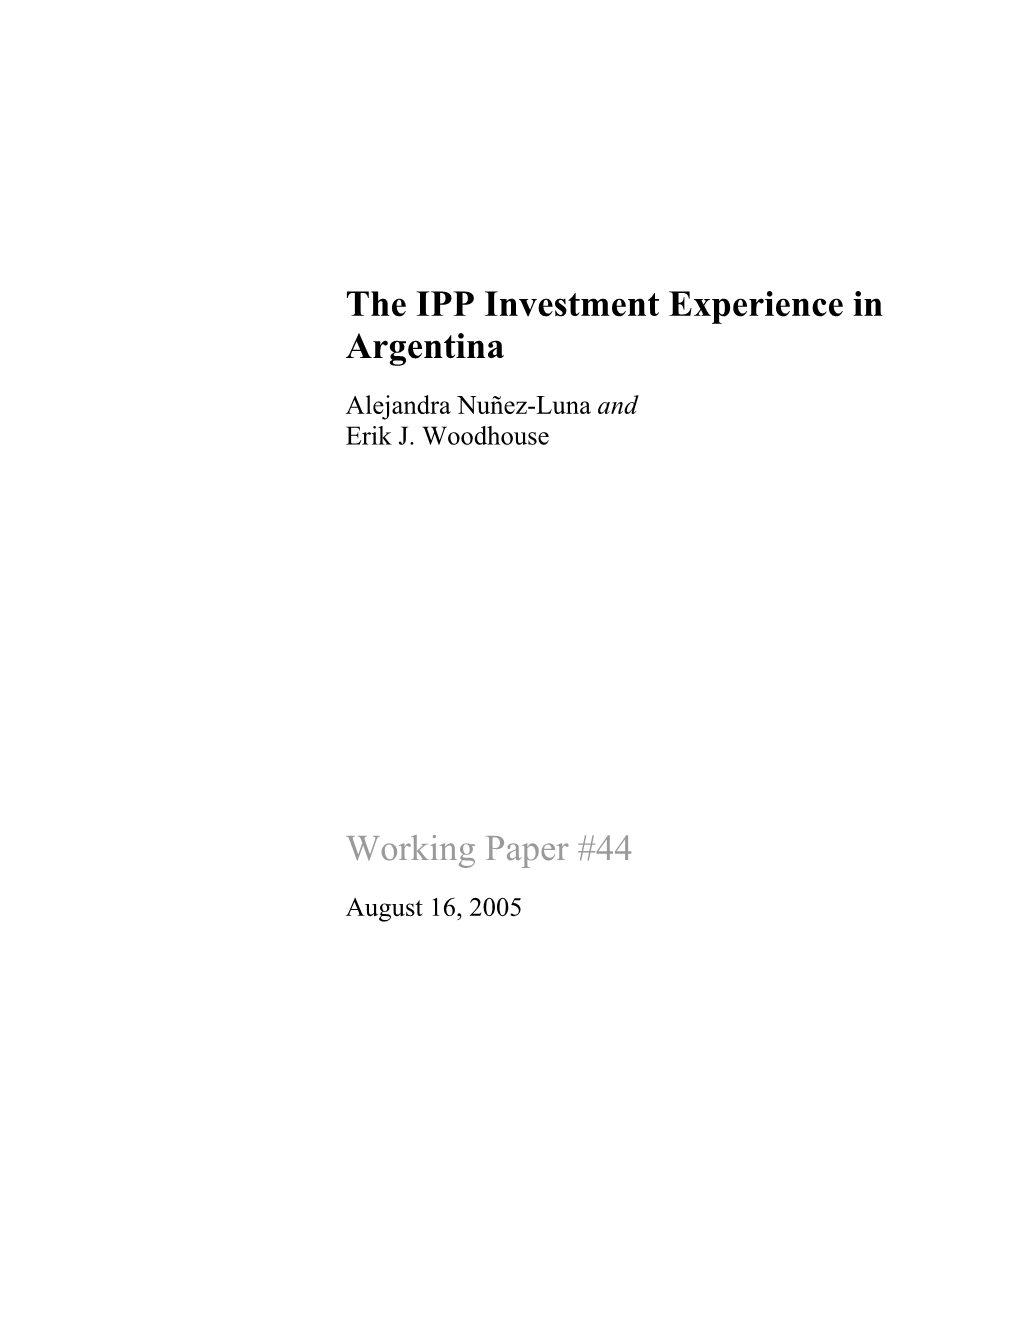 The IPP Investment Experience in Argentina Working Paper